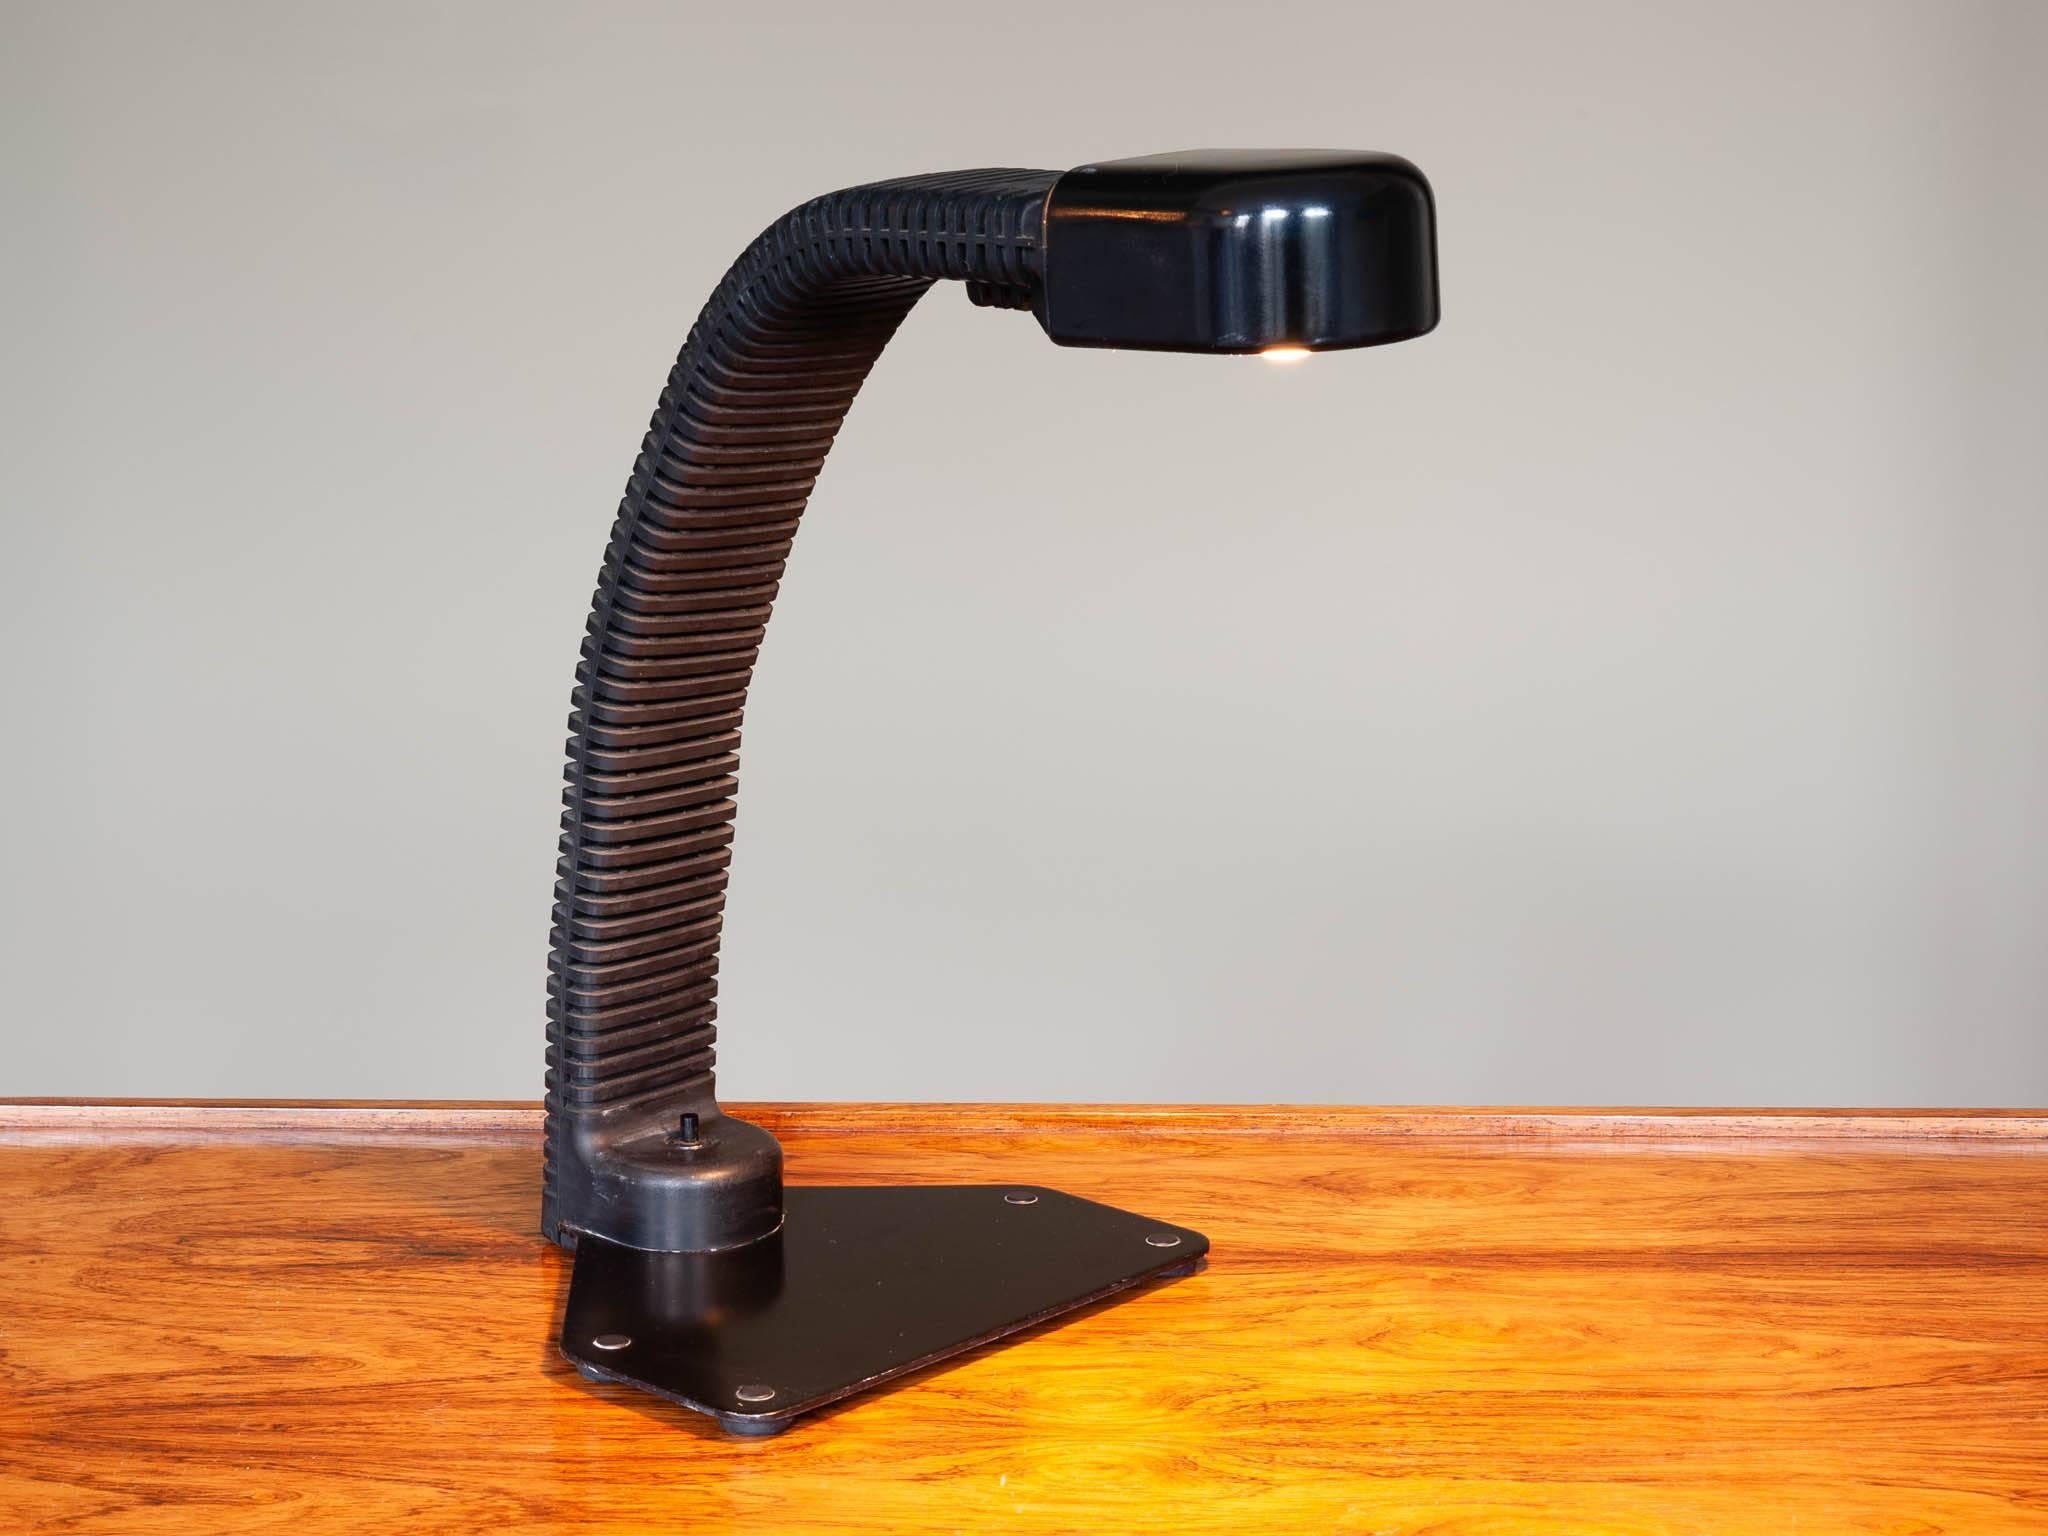 A flexible Cobra desk lamp designed by Kisho Kurokawa and produced by Yamagiwa. The lamp is made from black lacquered metal and rubber with a built in switch on the base. The light is flexible and adjustable to your own height and light